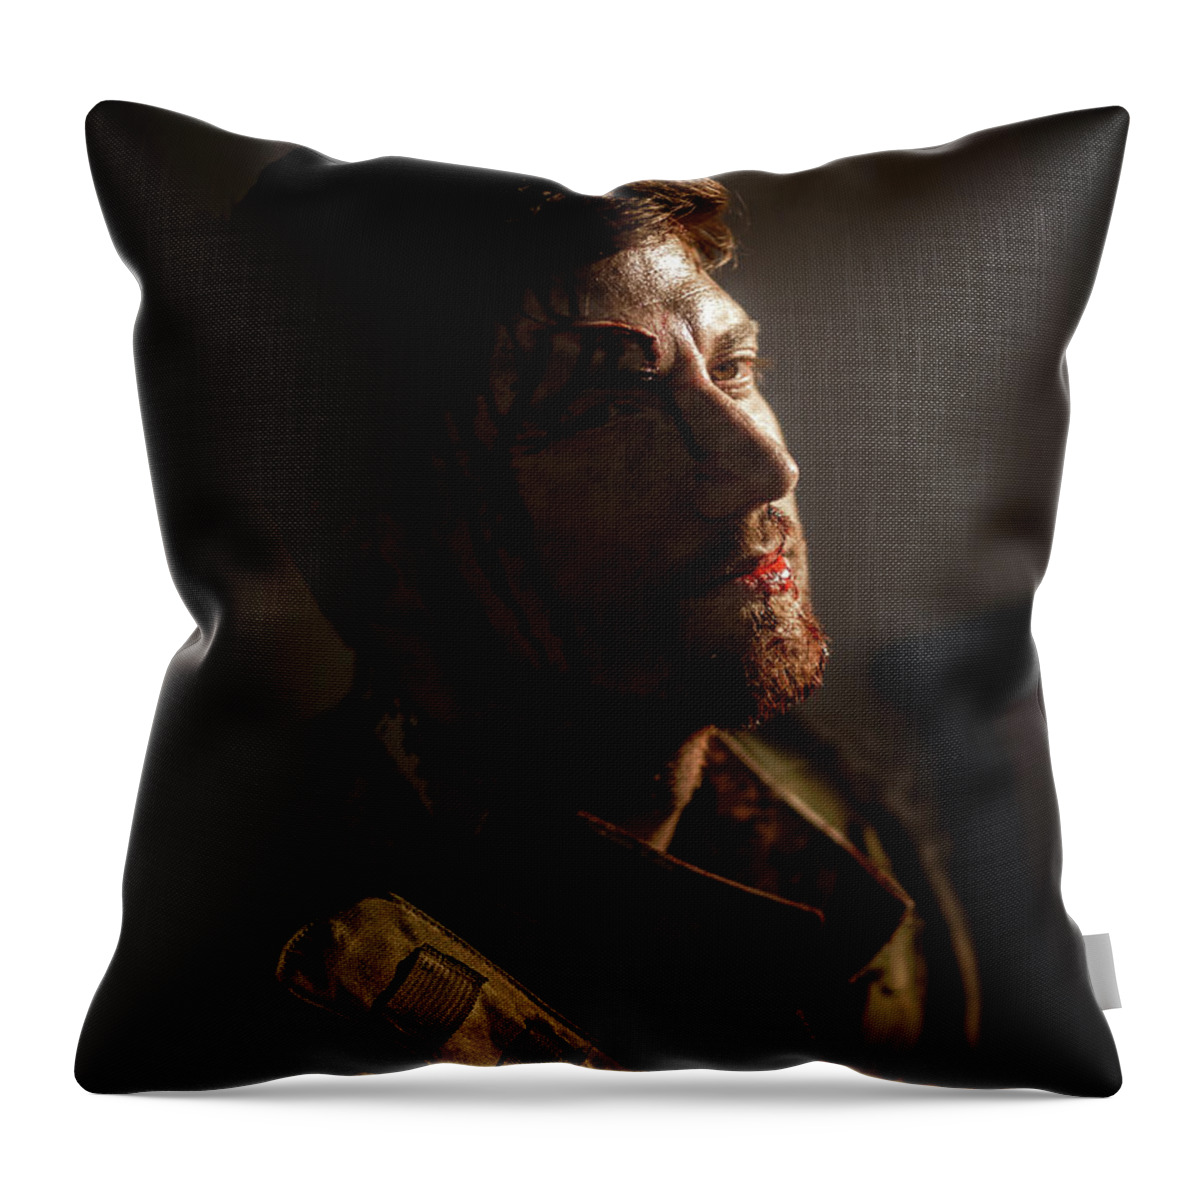 Fotofoxes Throw Pillow featuring the photograph A Soldier by Alexander Fedin